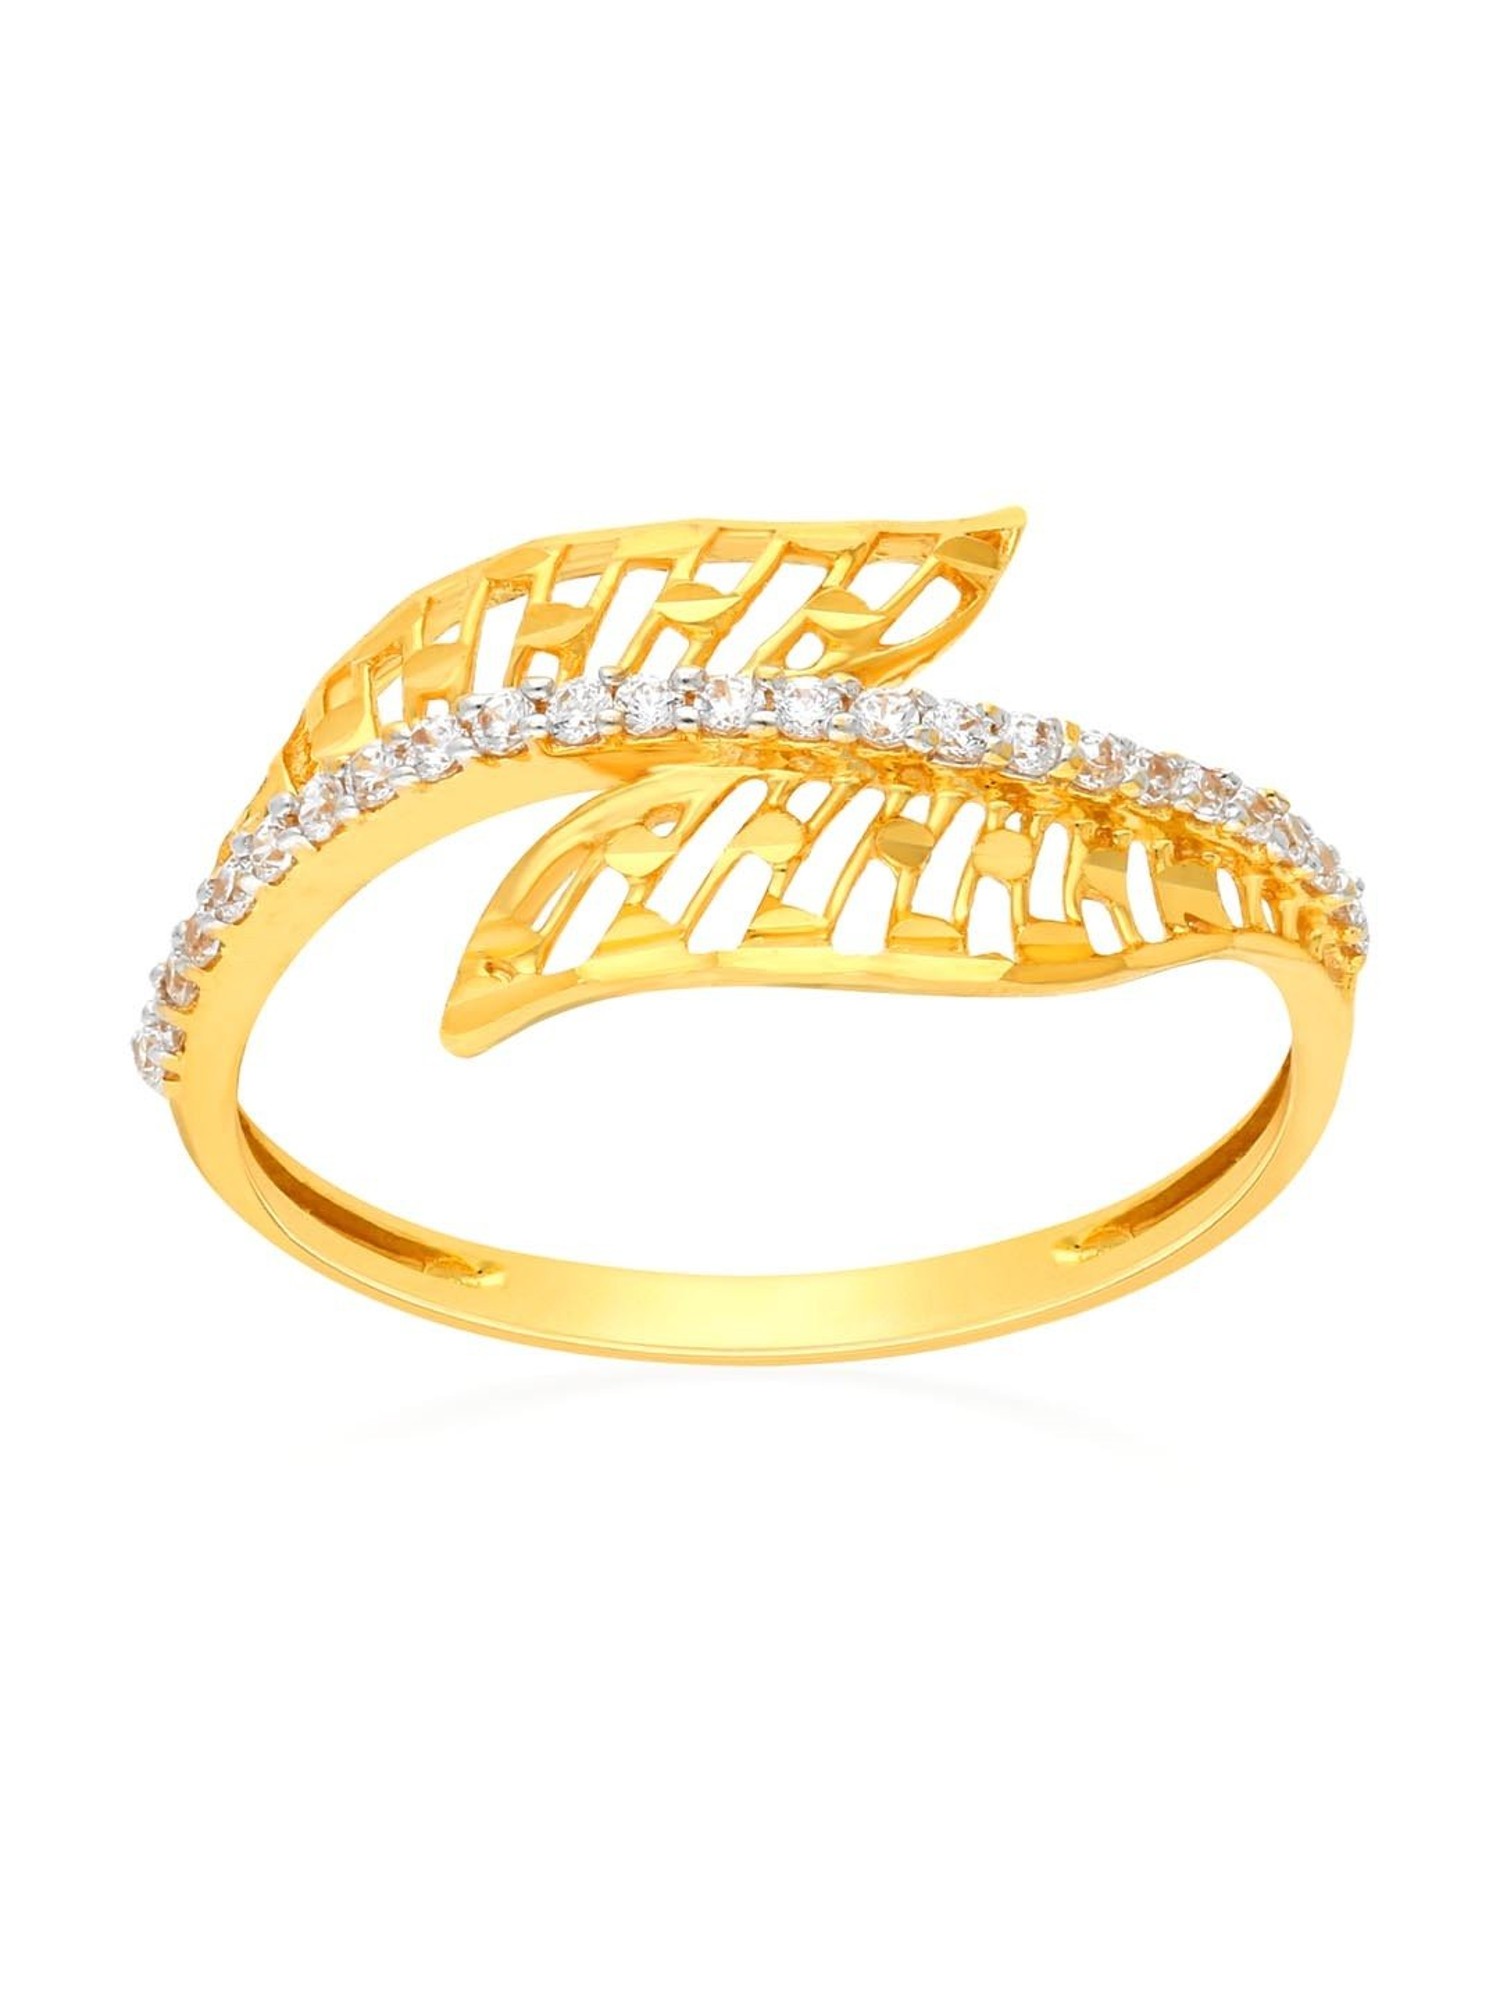 Buy MALABAR GOLD AND DIAMONDS Mens Gold Ring FRANDZ0087 Size 20 | Shoppers  Stop